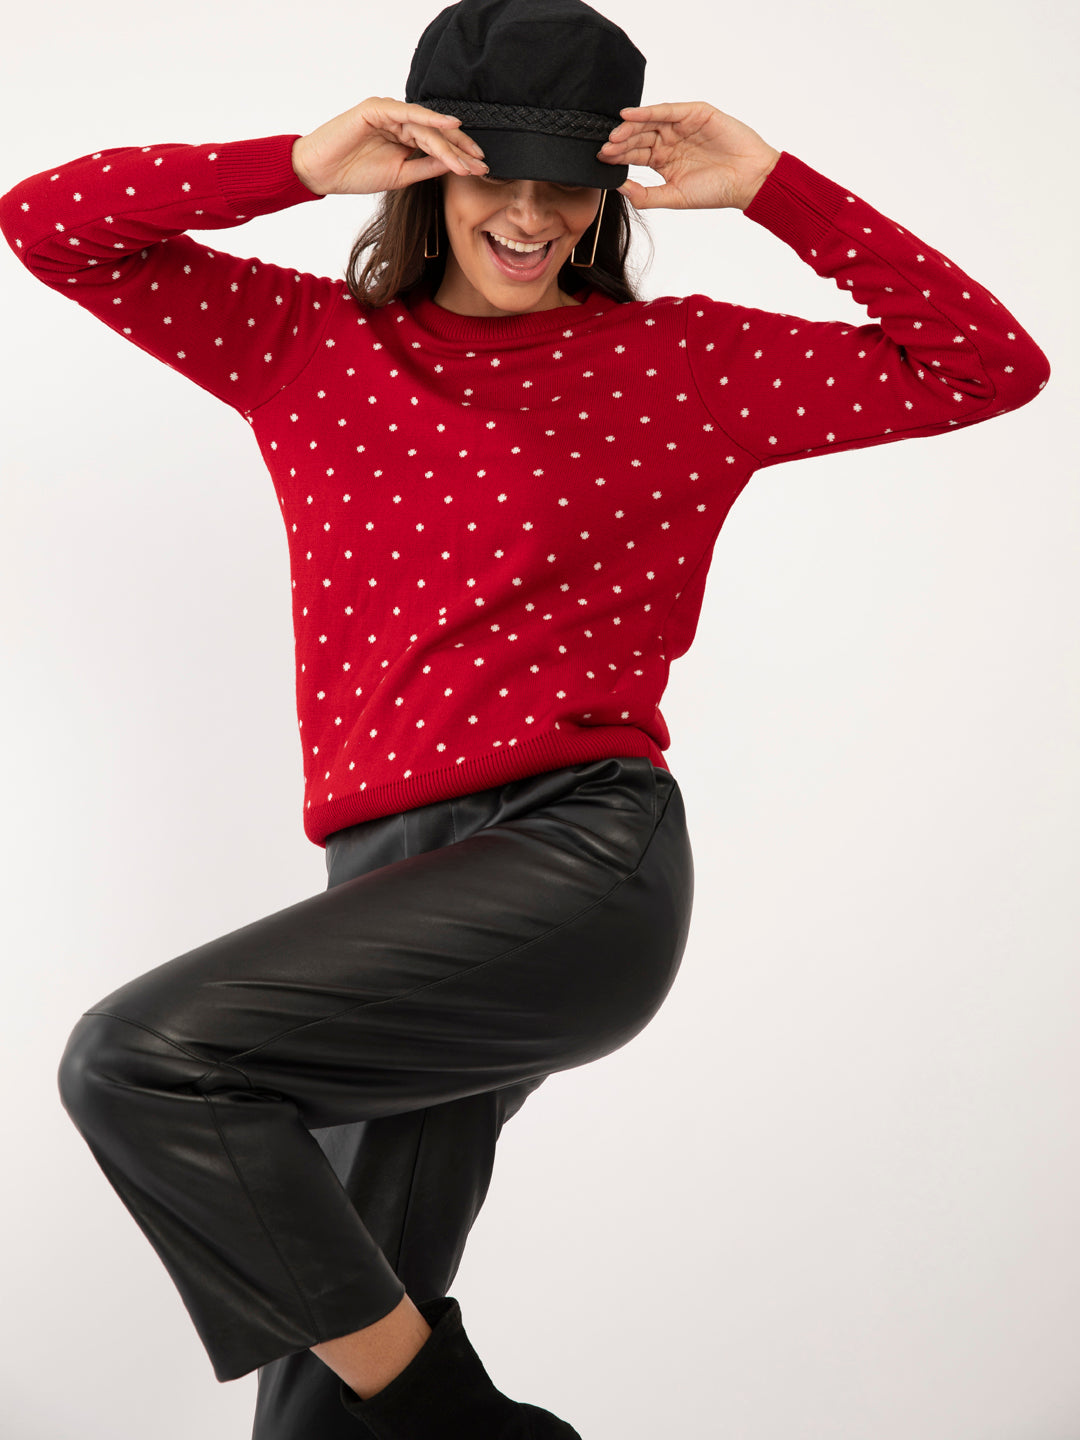 Red Polka Sweater For Women